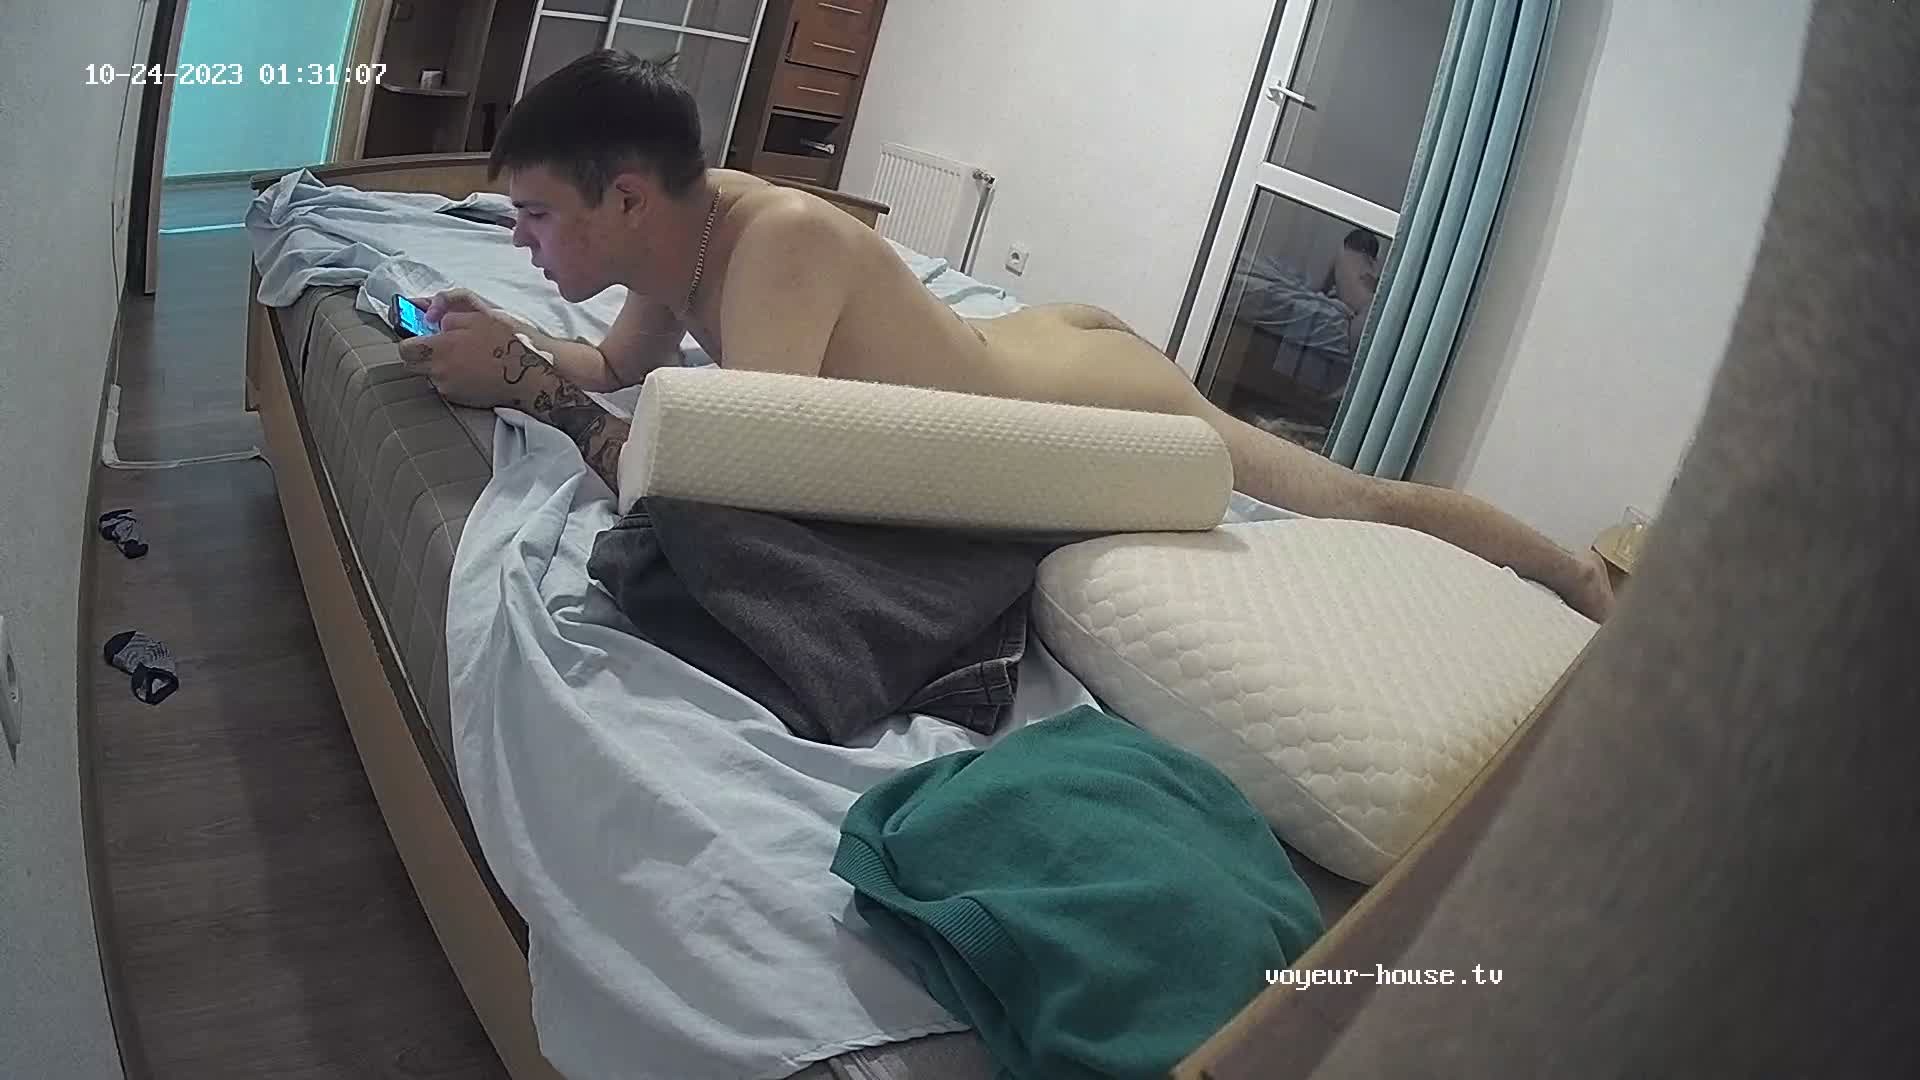 Artem naked on the bed 24 Oct 2023